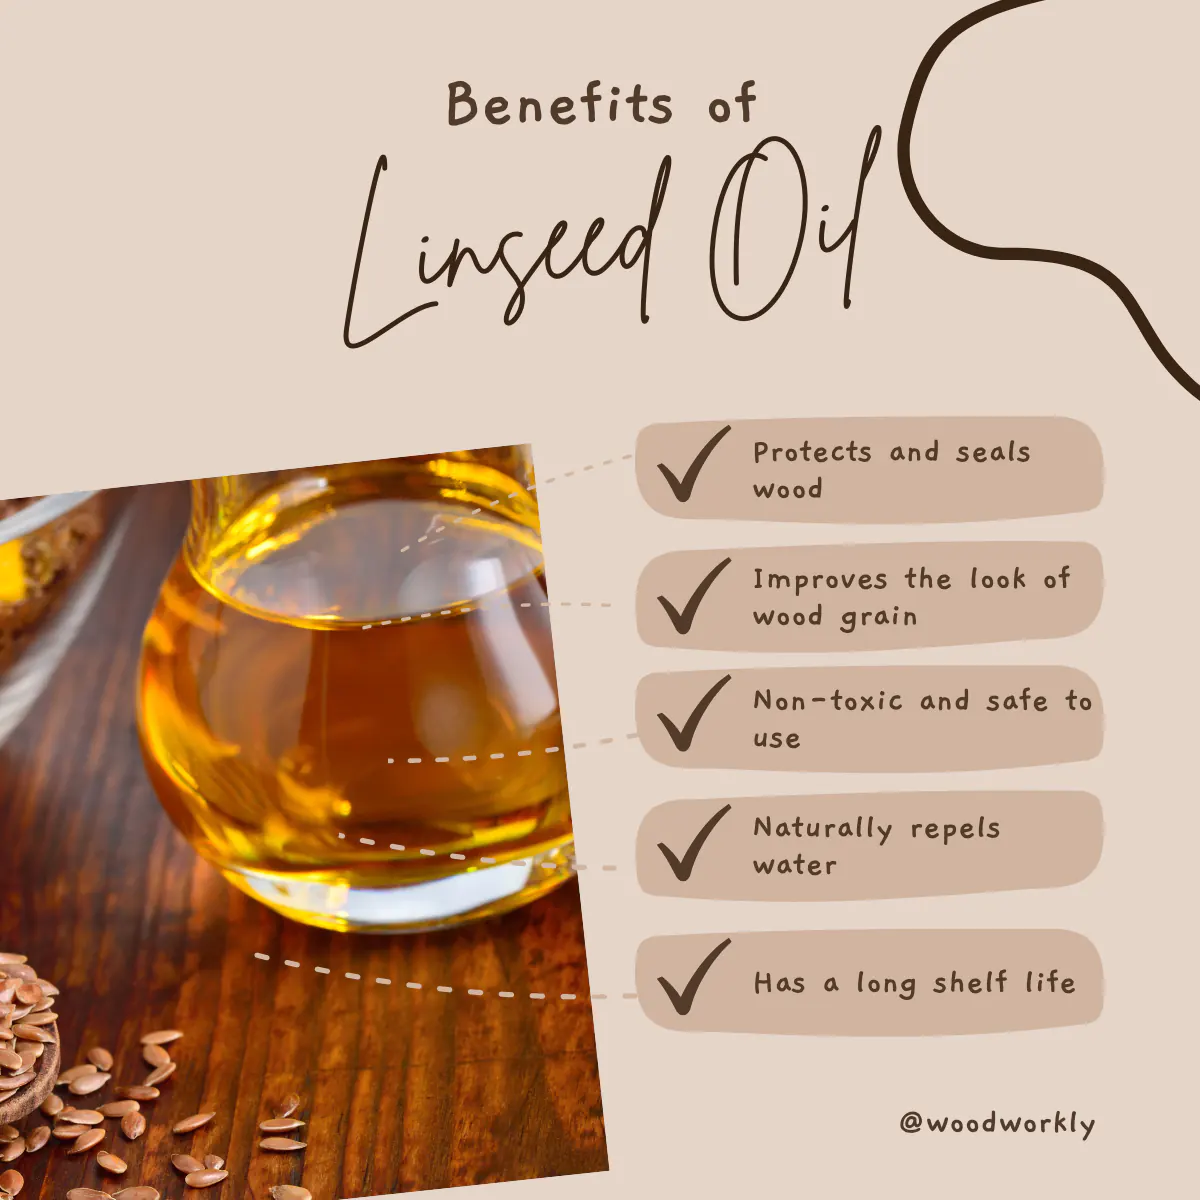 Benefits of linseed oil